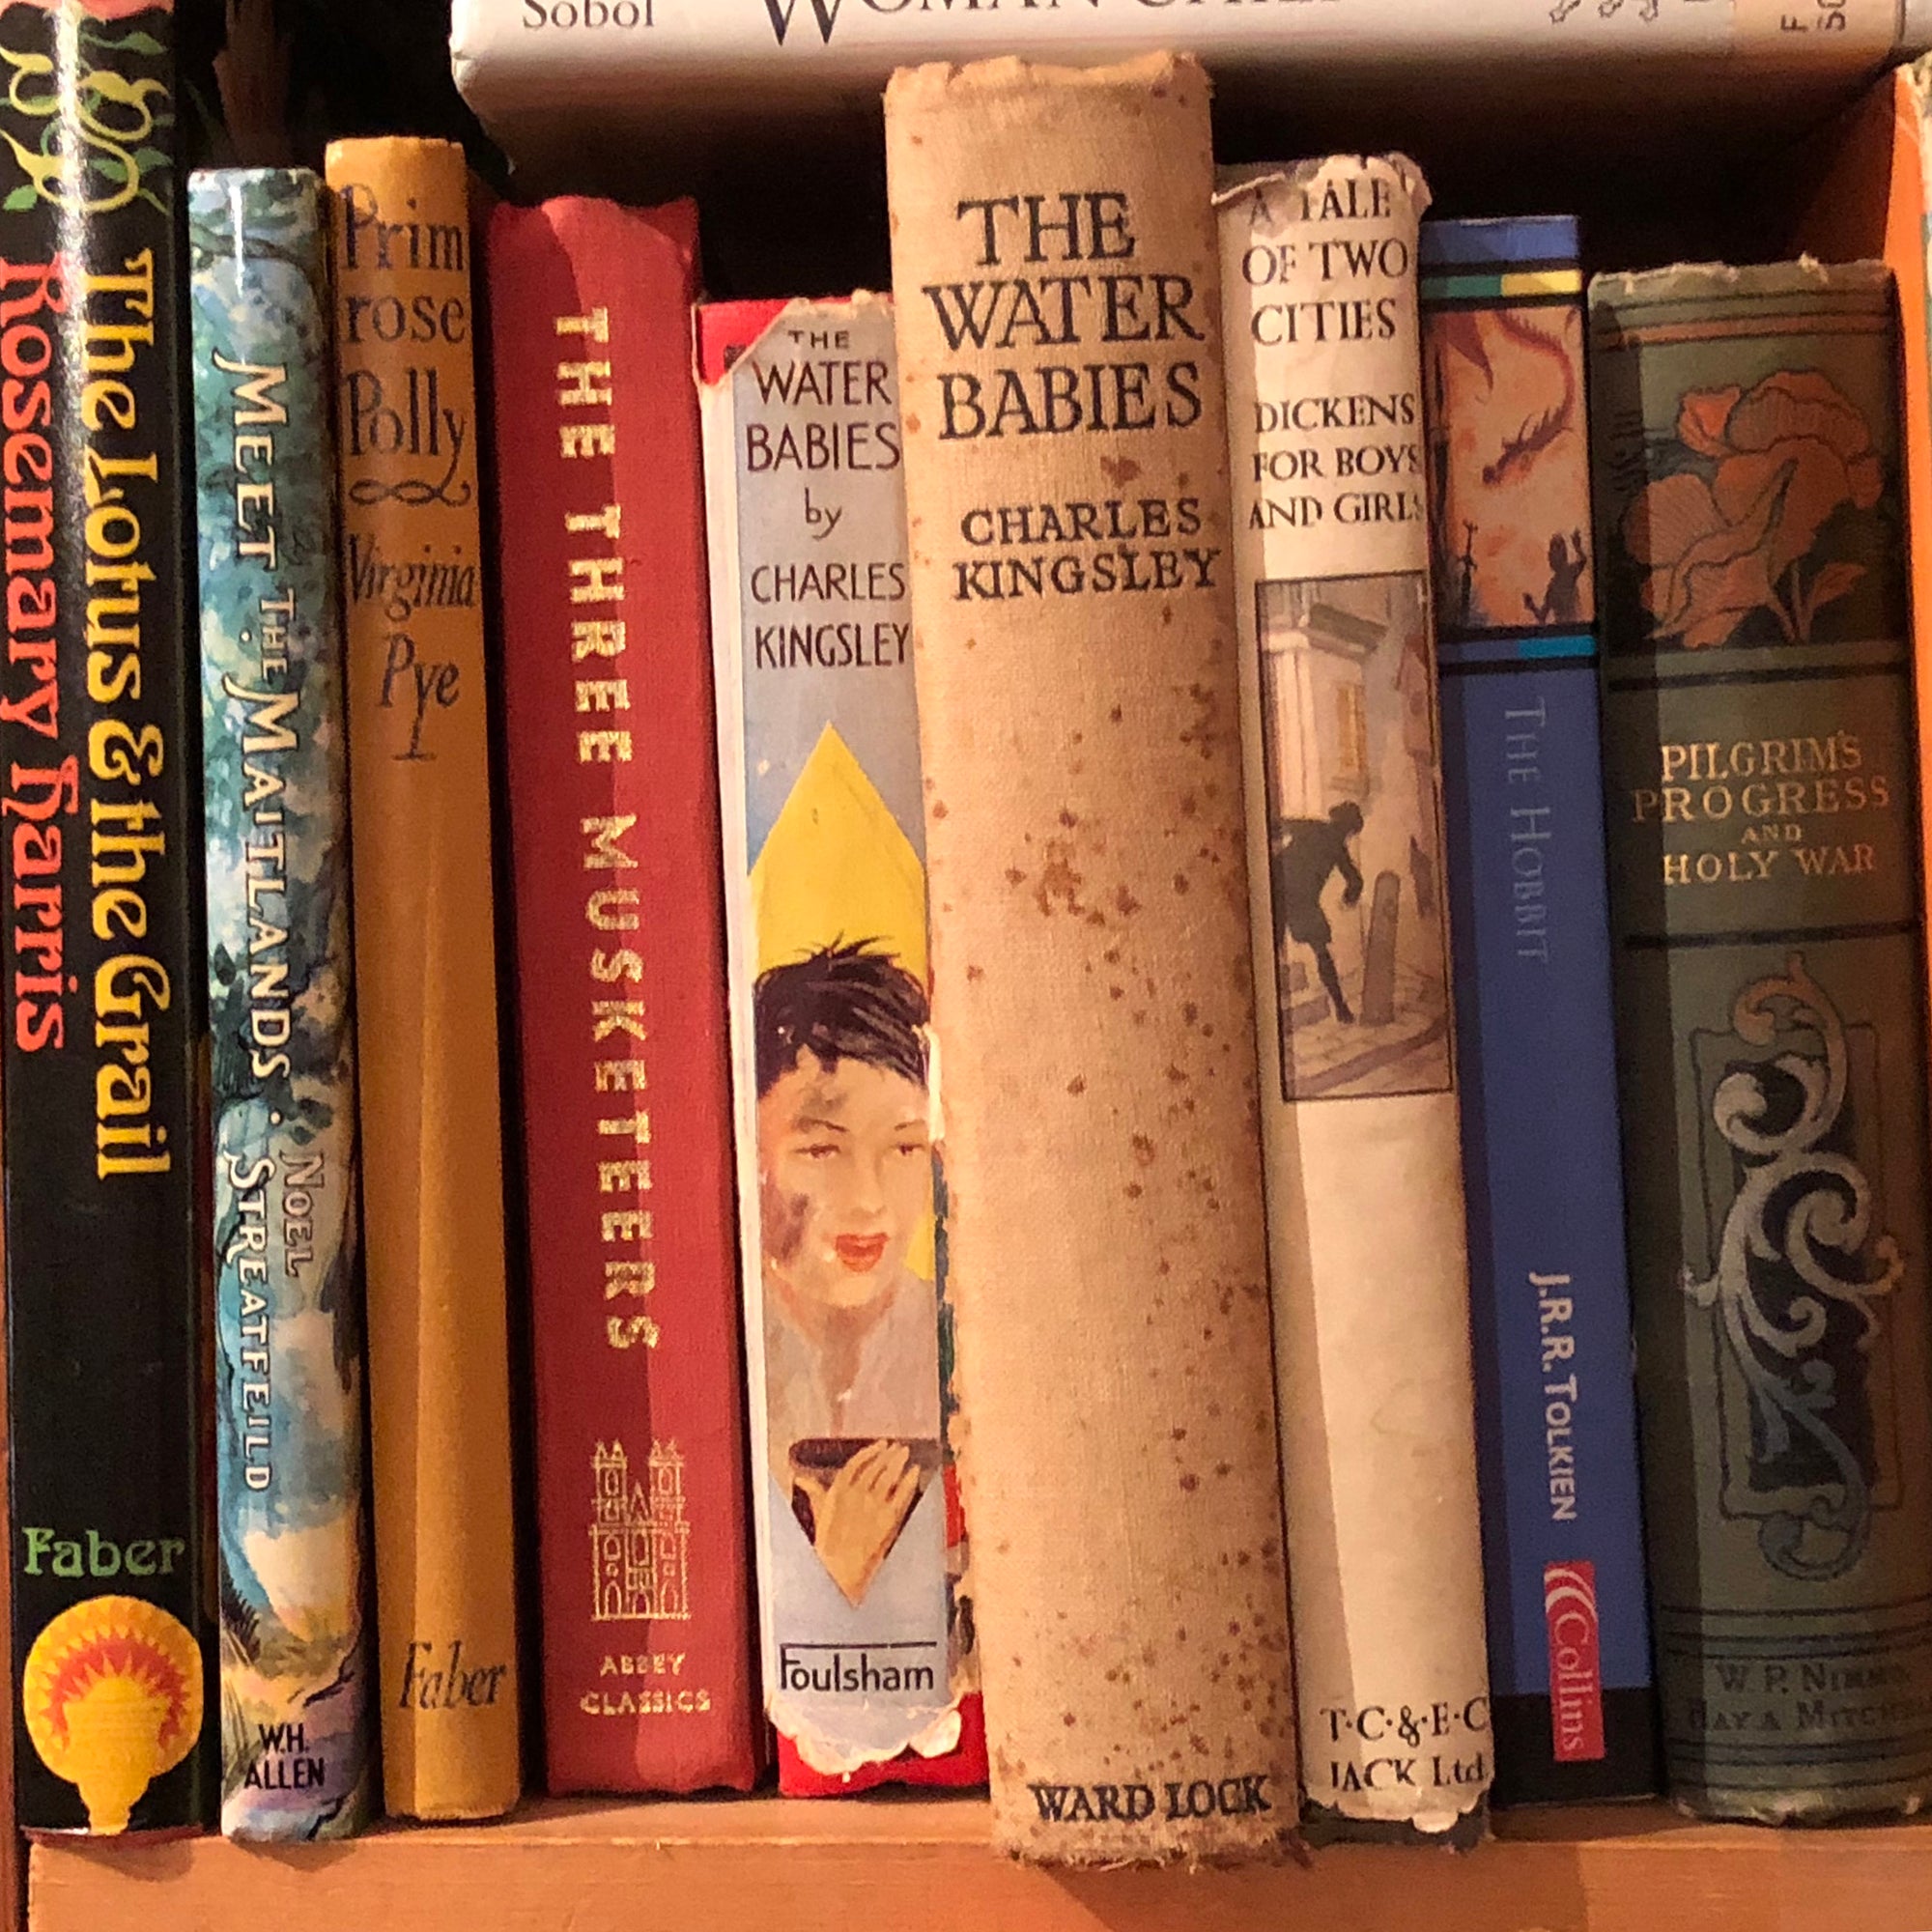 'Water Babies' shows the well worn spines of vintage children's books on a shelf, photographed by Richard Heeps in a secondhand bookshop in the British Seaside town Sheringham.